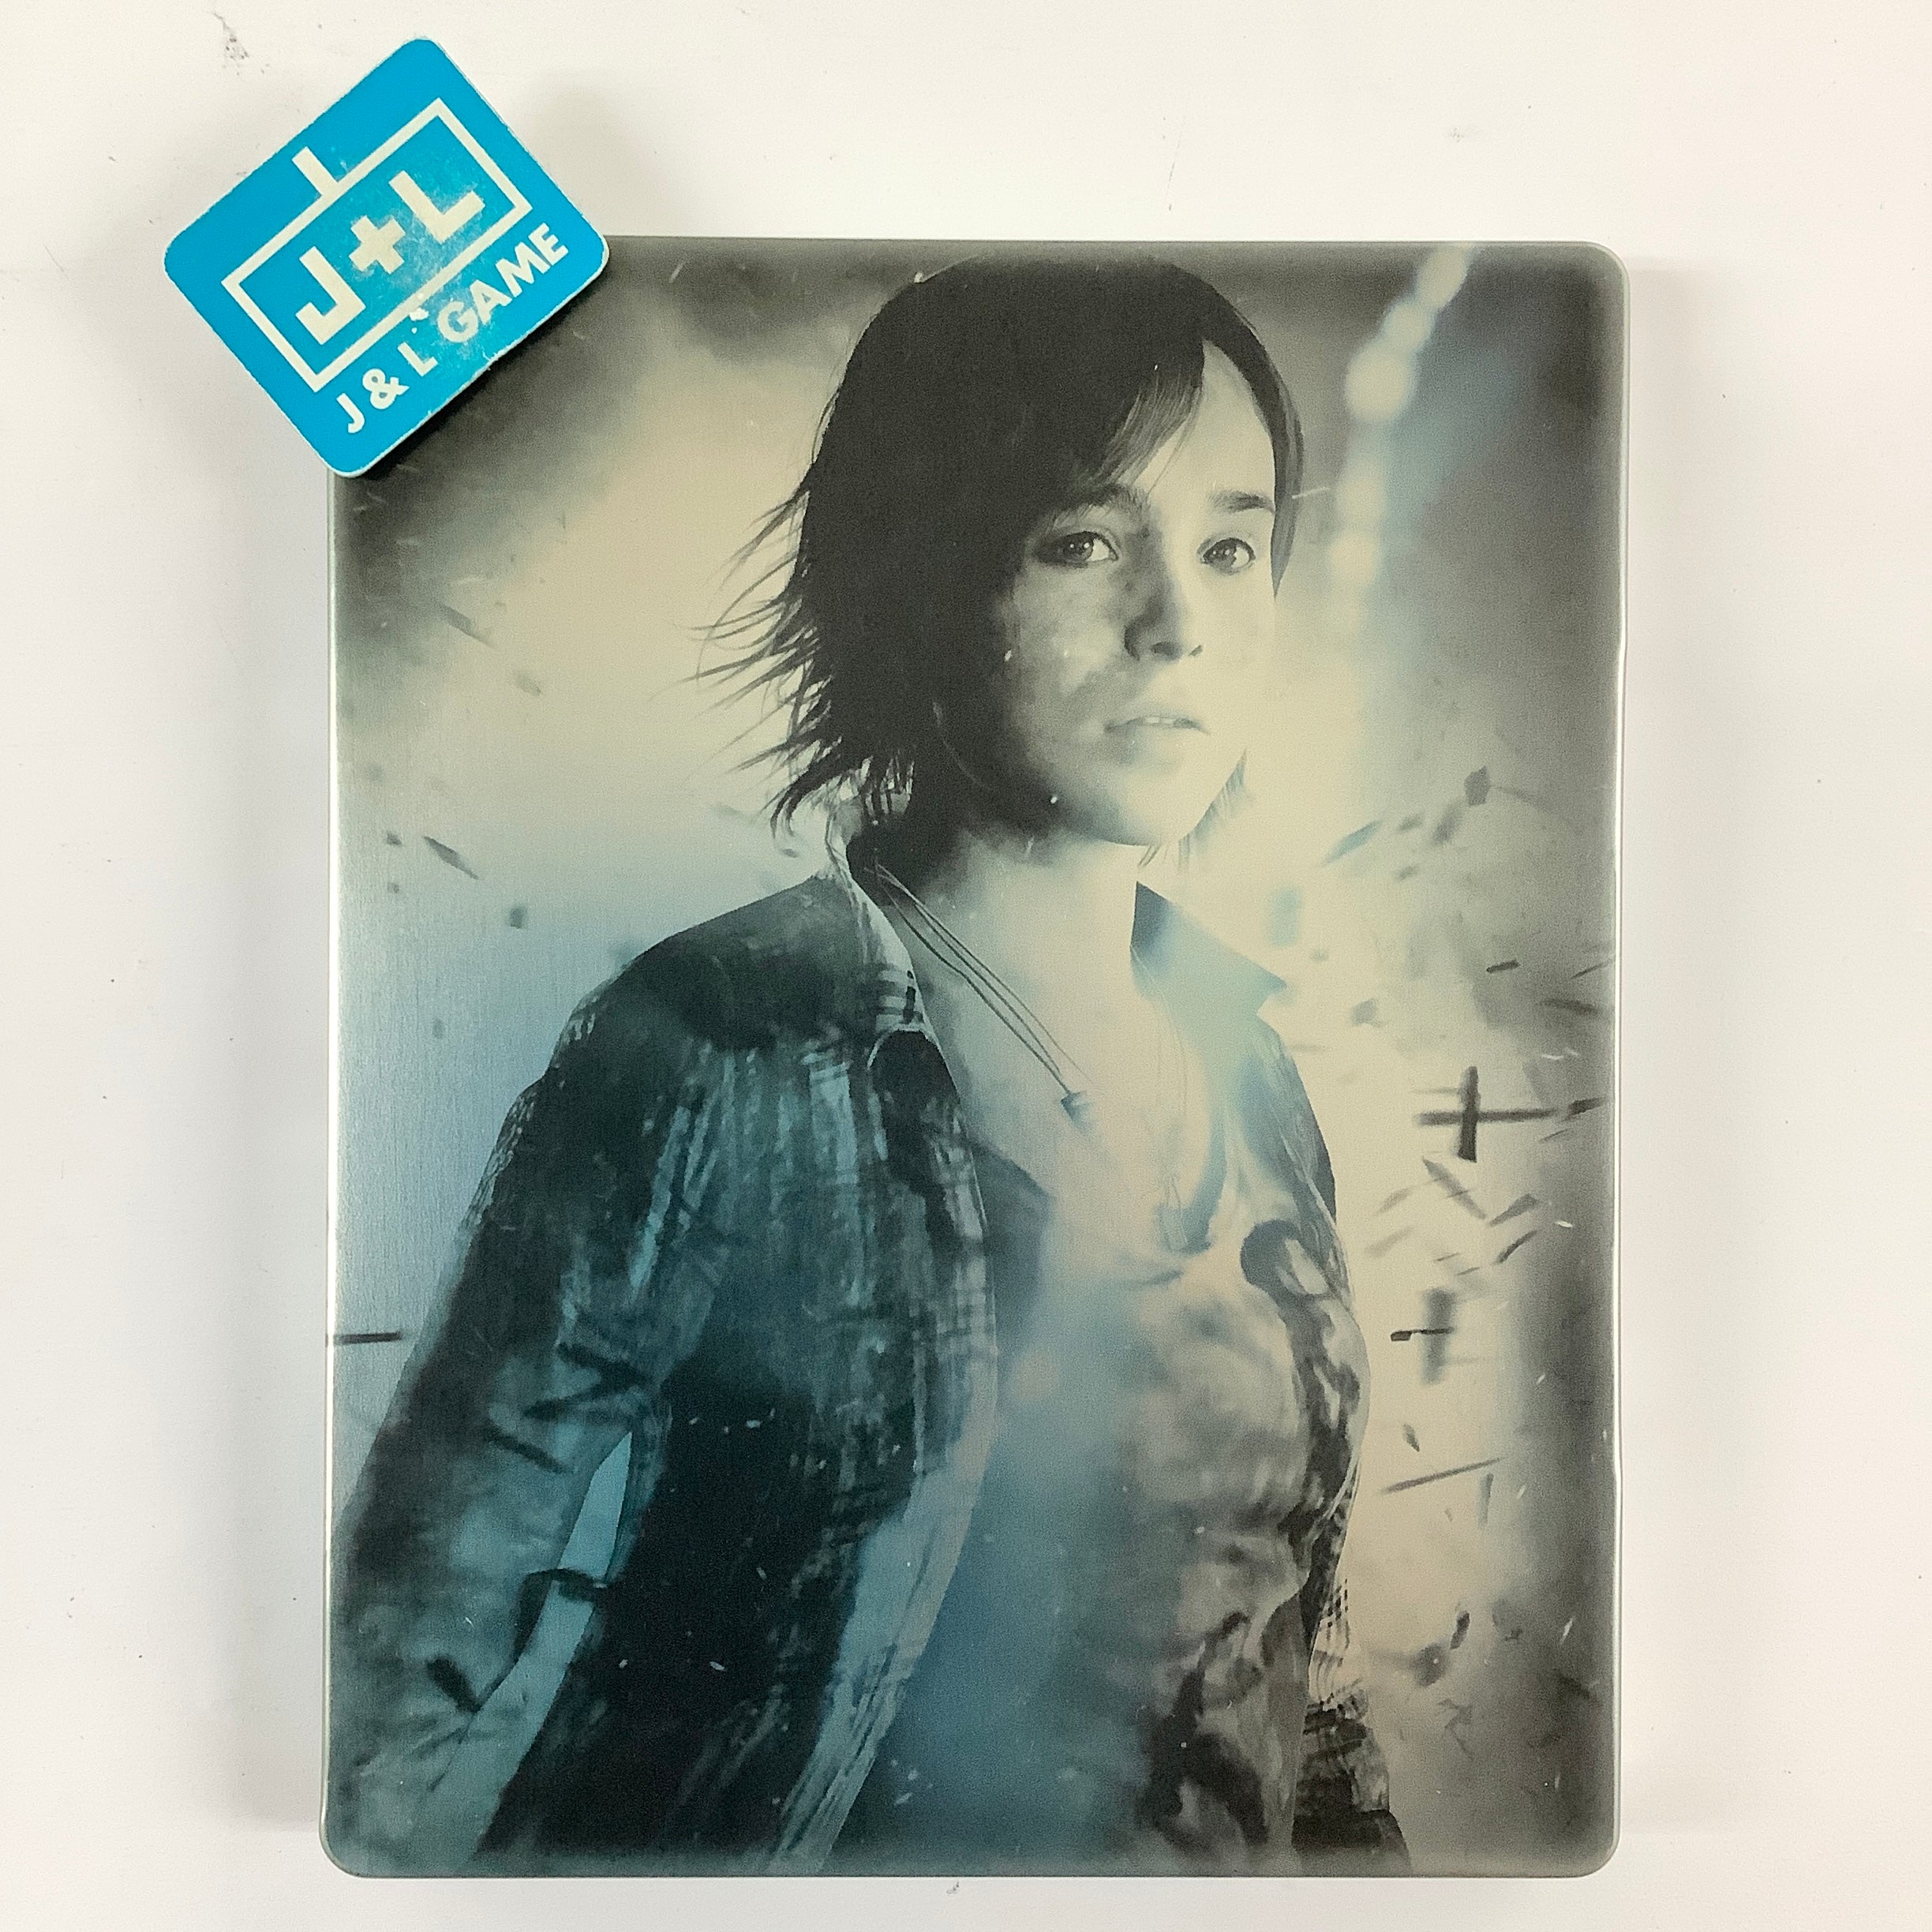 Beyond: Two Souls (Special Edition) - (PS3) PlayStation 3 [Pre-Owned] Video Games SCEI   